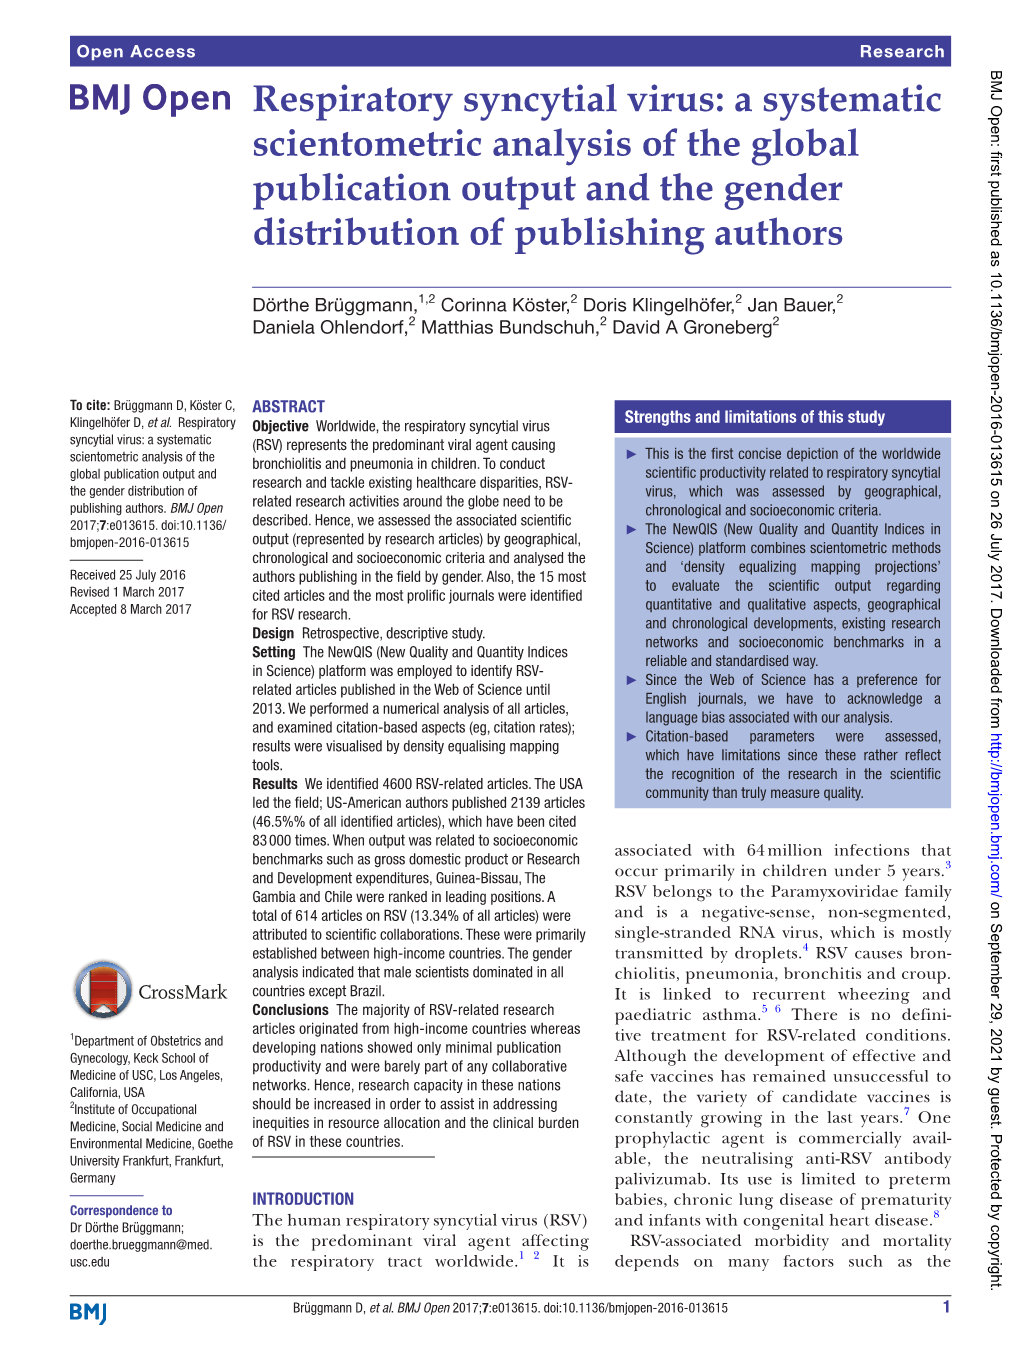 Respiratory Syncytial Virus: a Systematic Scientometric Analysis of the Global Publication Output and the Gender Distribution of Publishing Authors